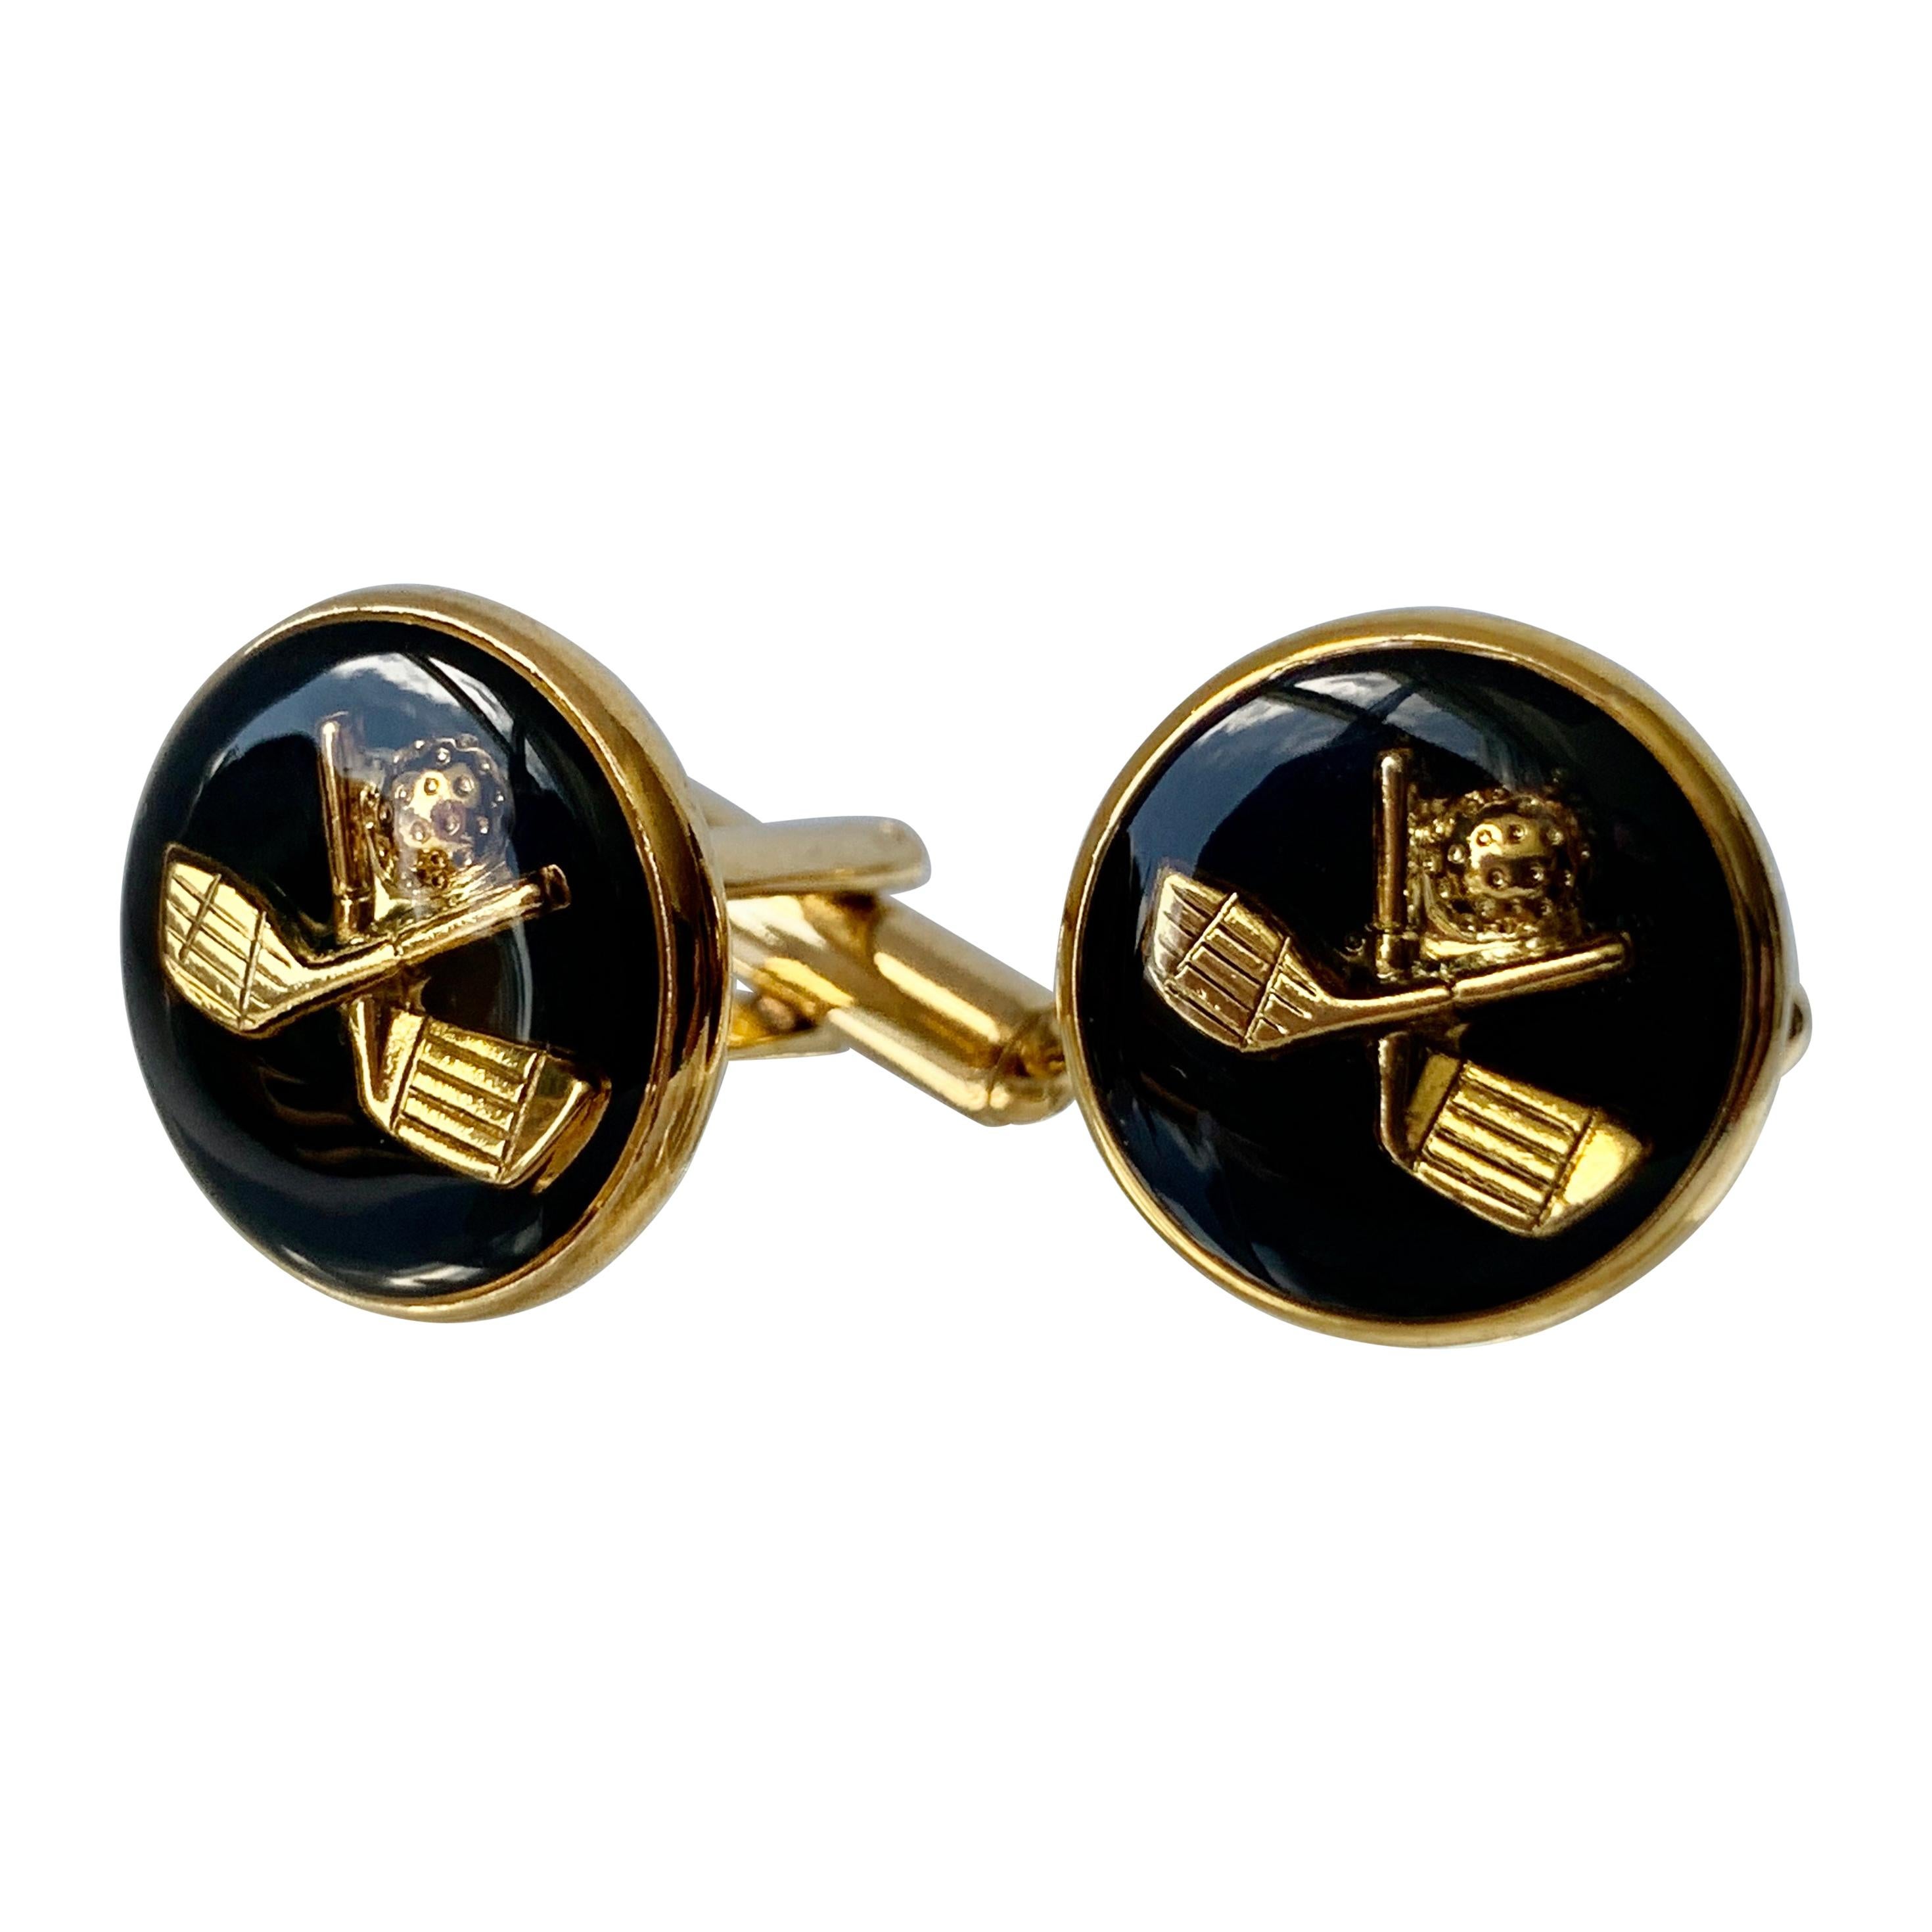 A Pair of Cufflinks with Golf Clubs & Ball on a Black Ground with "T" Backs